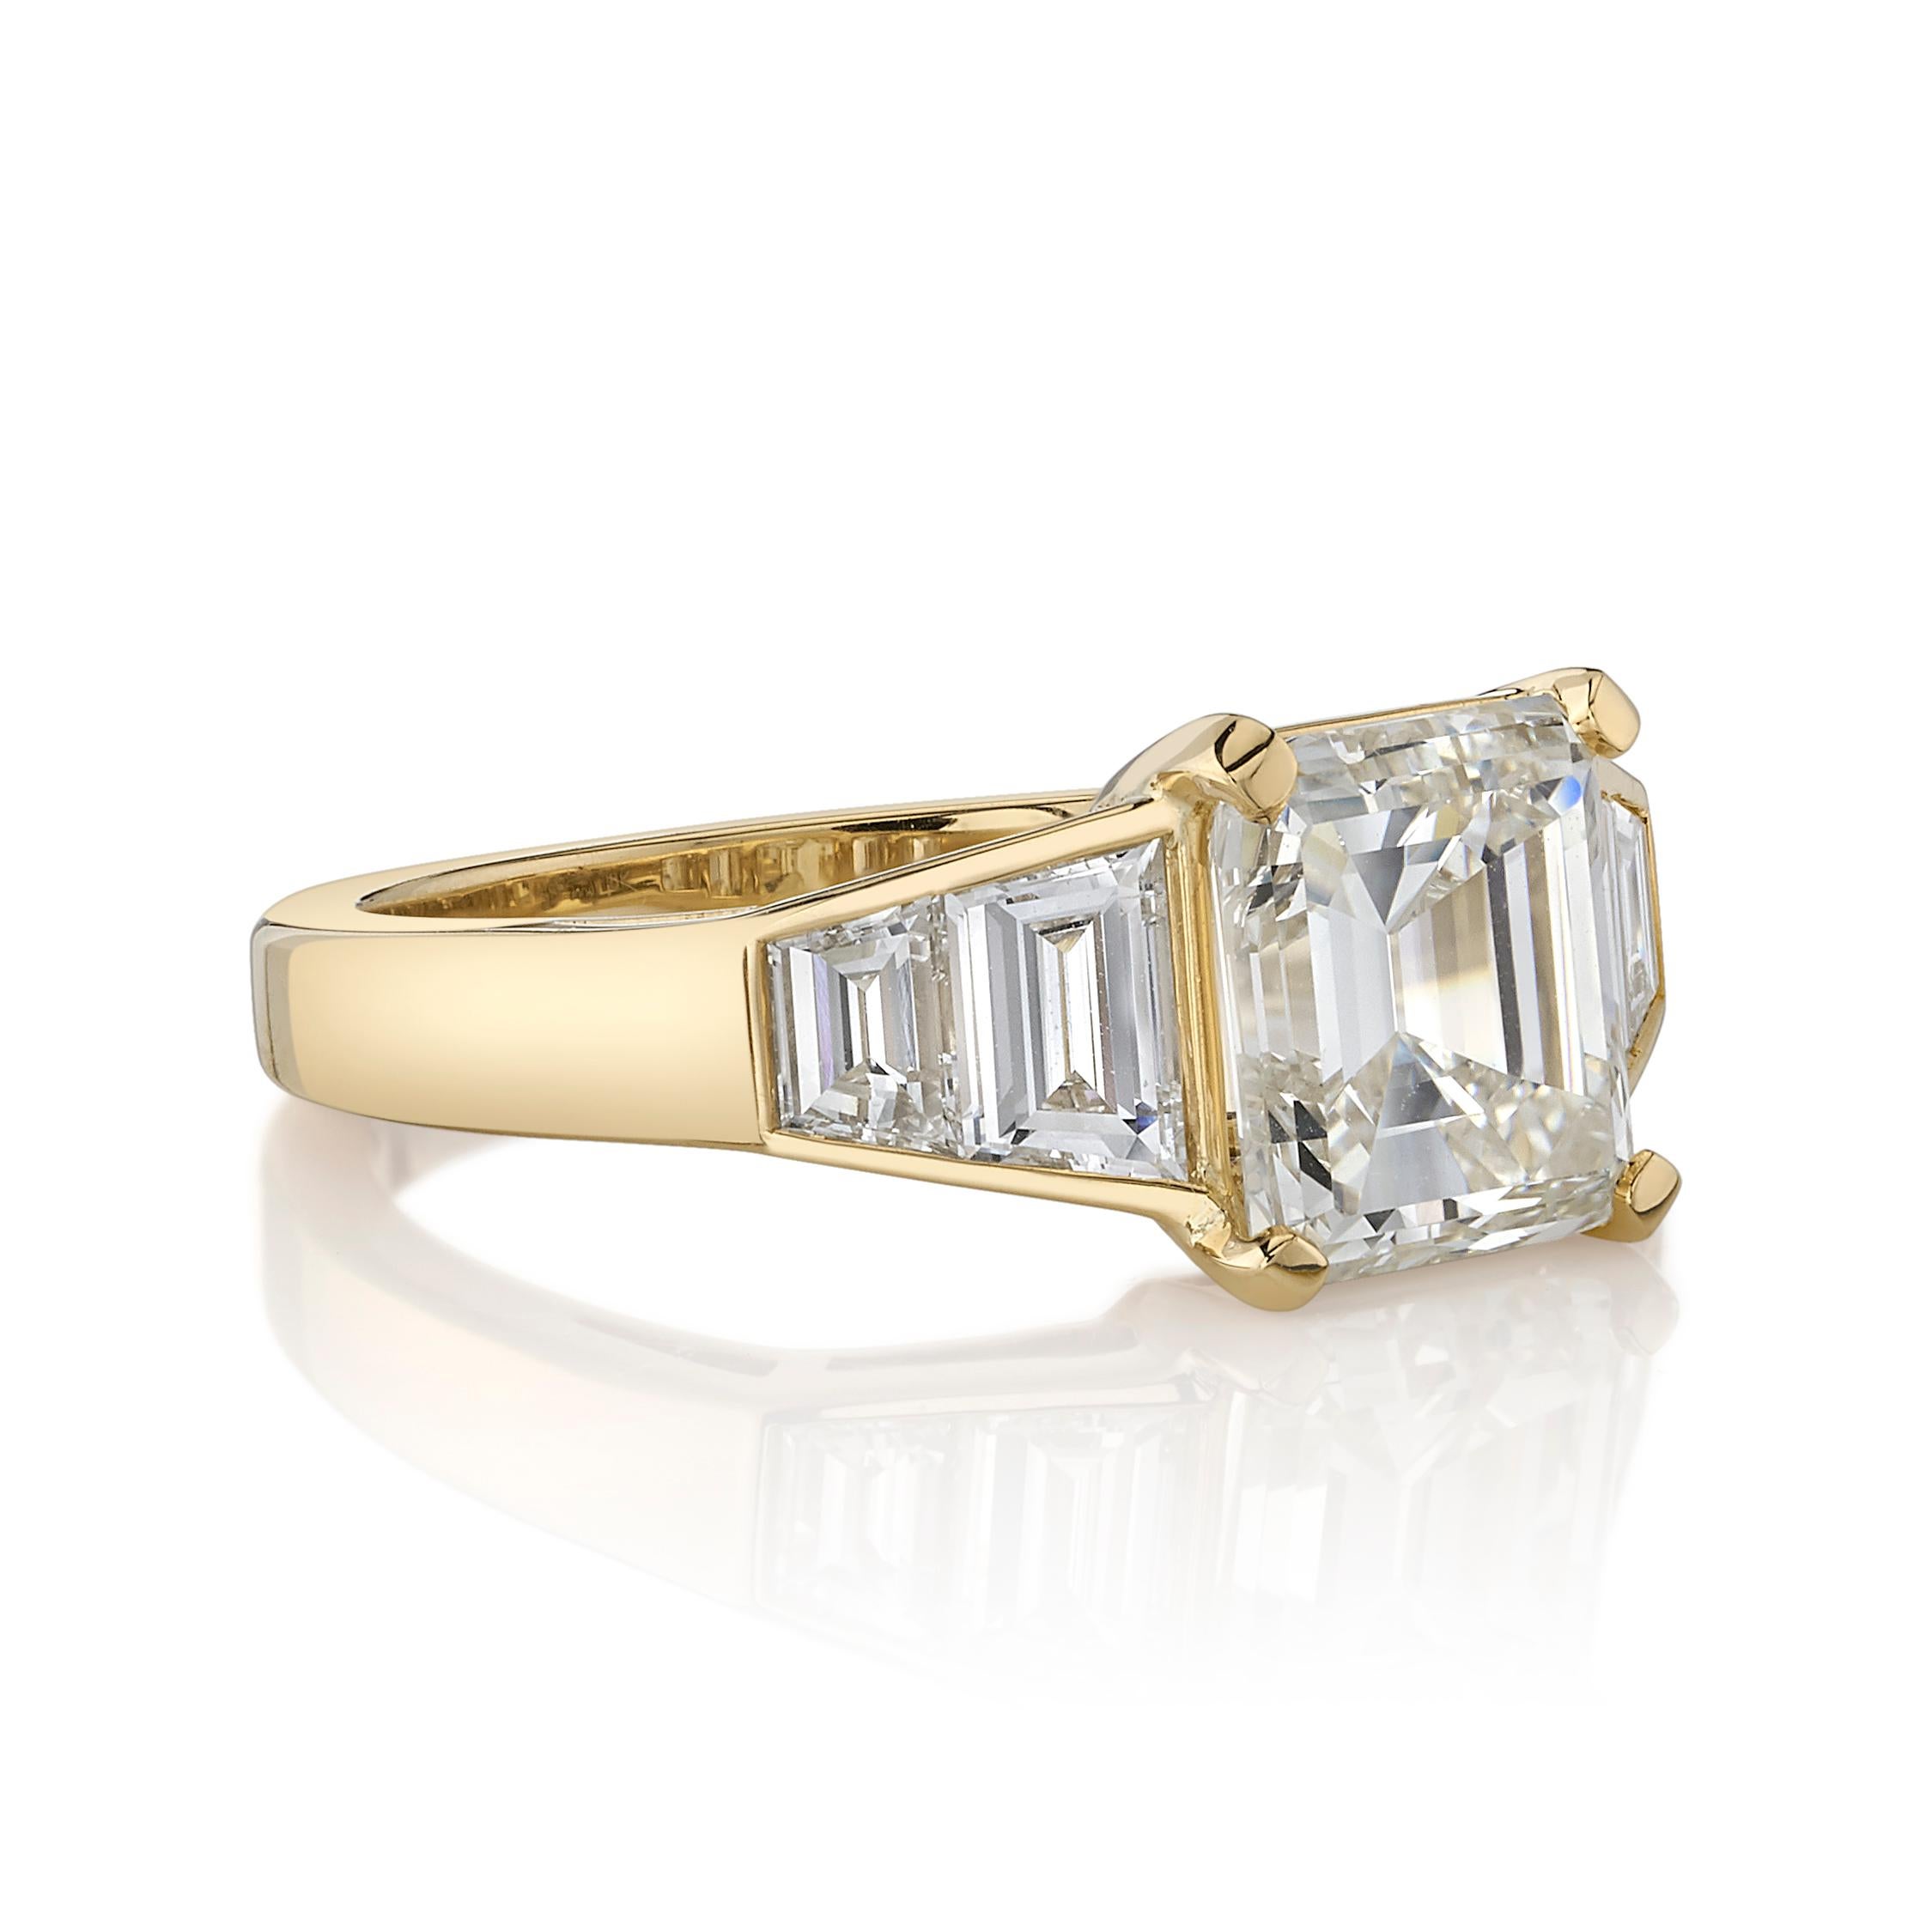 2.60ct L/SI1 GIA certified vintage Asscher cut diamond with 0.86ctw Trapezoid cut accent diamonds set in a handcrafted 18K yellow gold mounting.

Ring is currently a size 6 and can be sized to fit.

Our jewelry is made locally in Los Angeles and